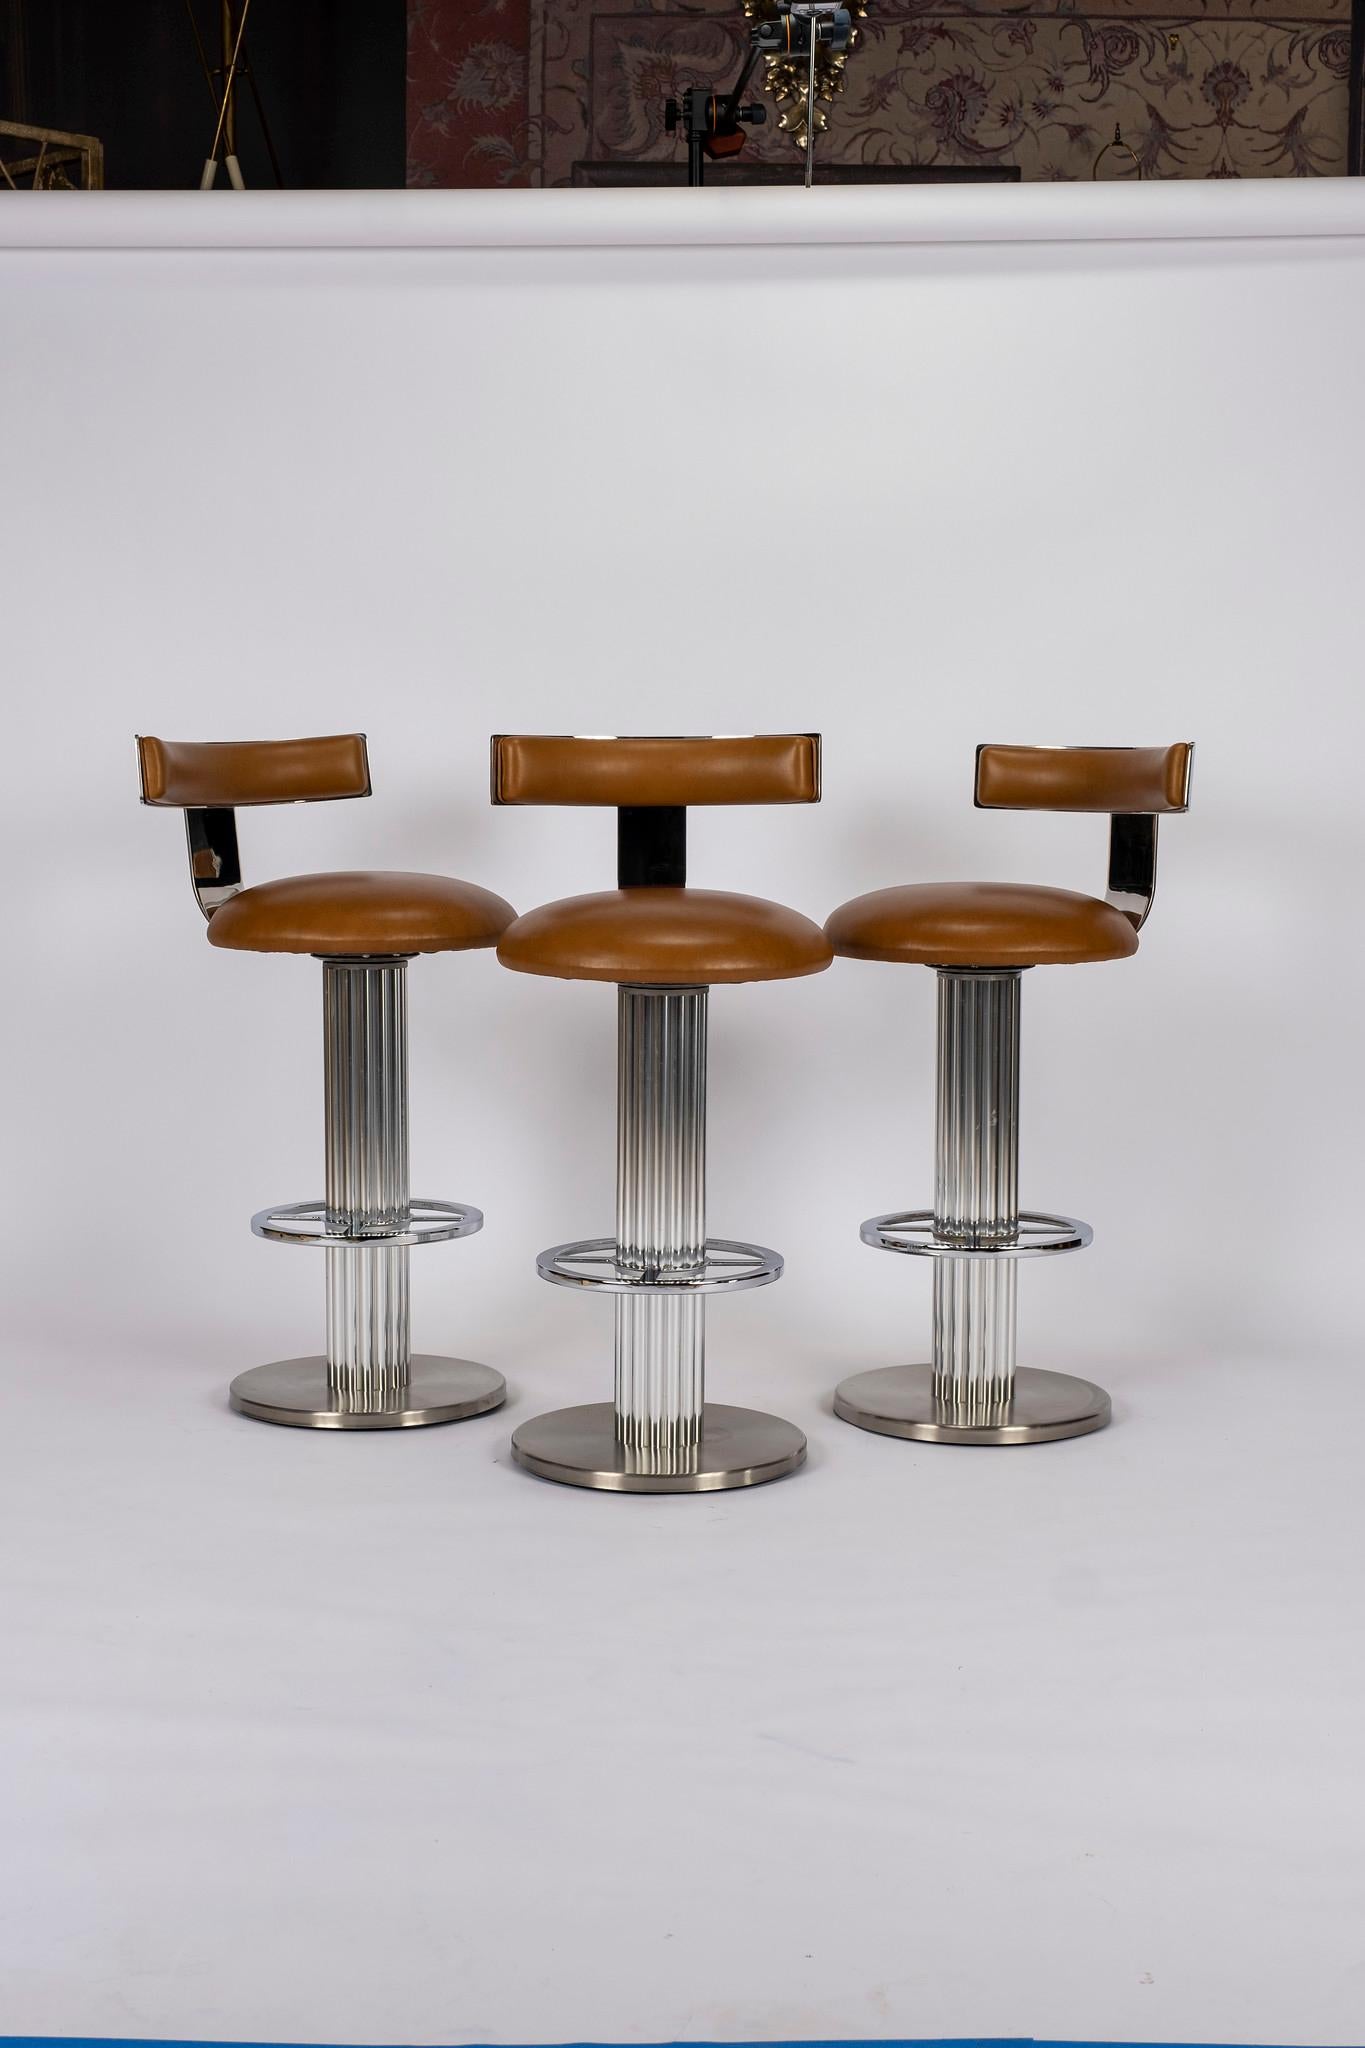 A set of three Design For Leisure chrome barstools newly upholstered in an Italian cognac leather.